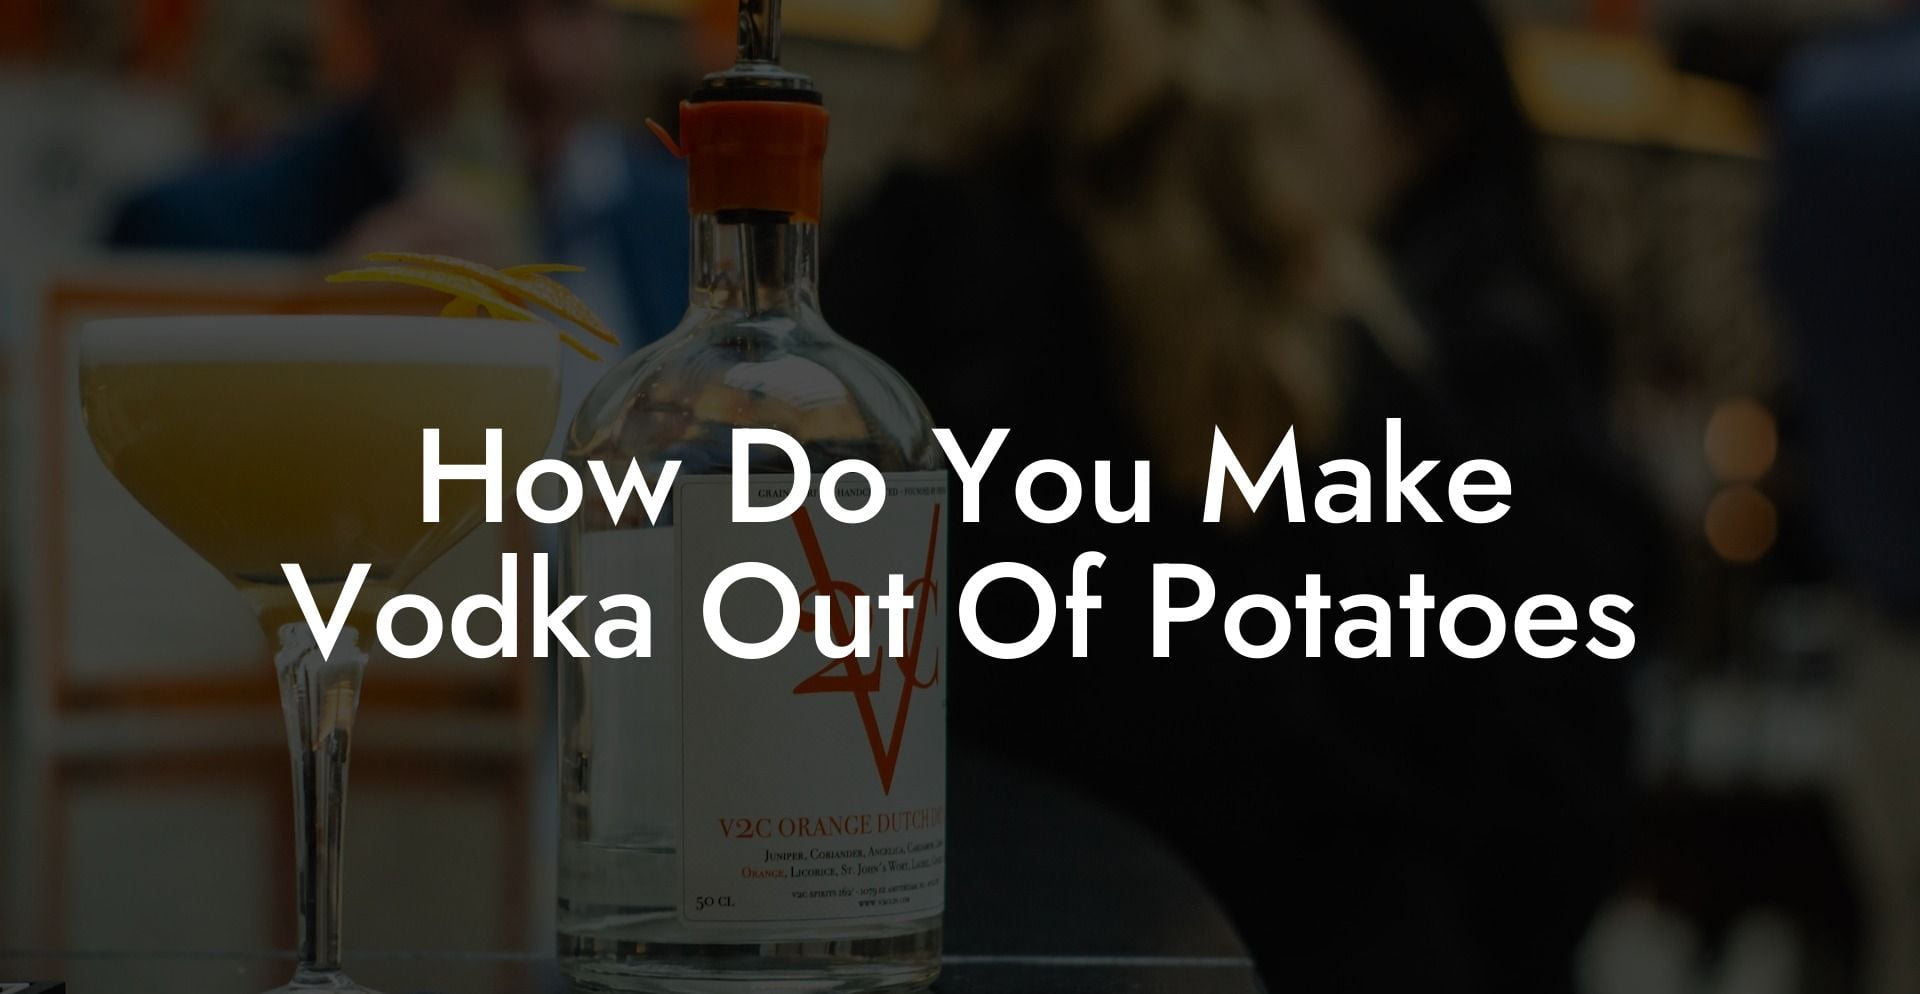 How Do You Make Vodka Out Of Potatoes